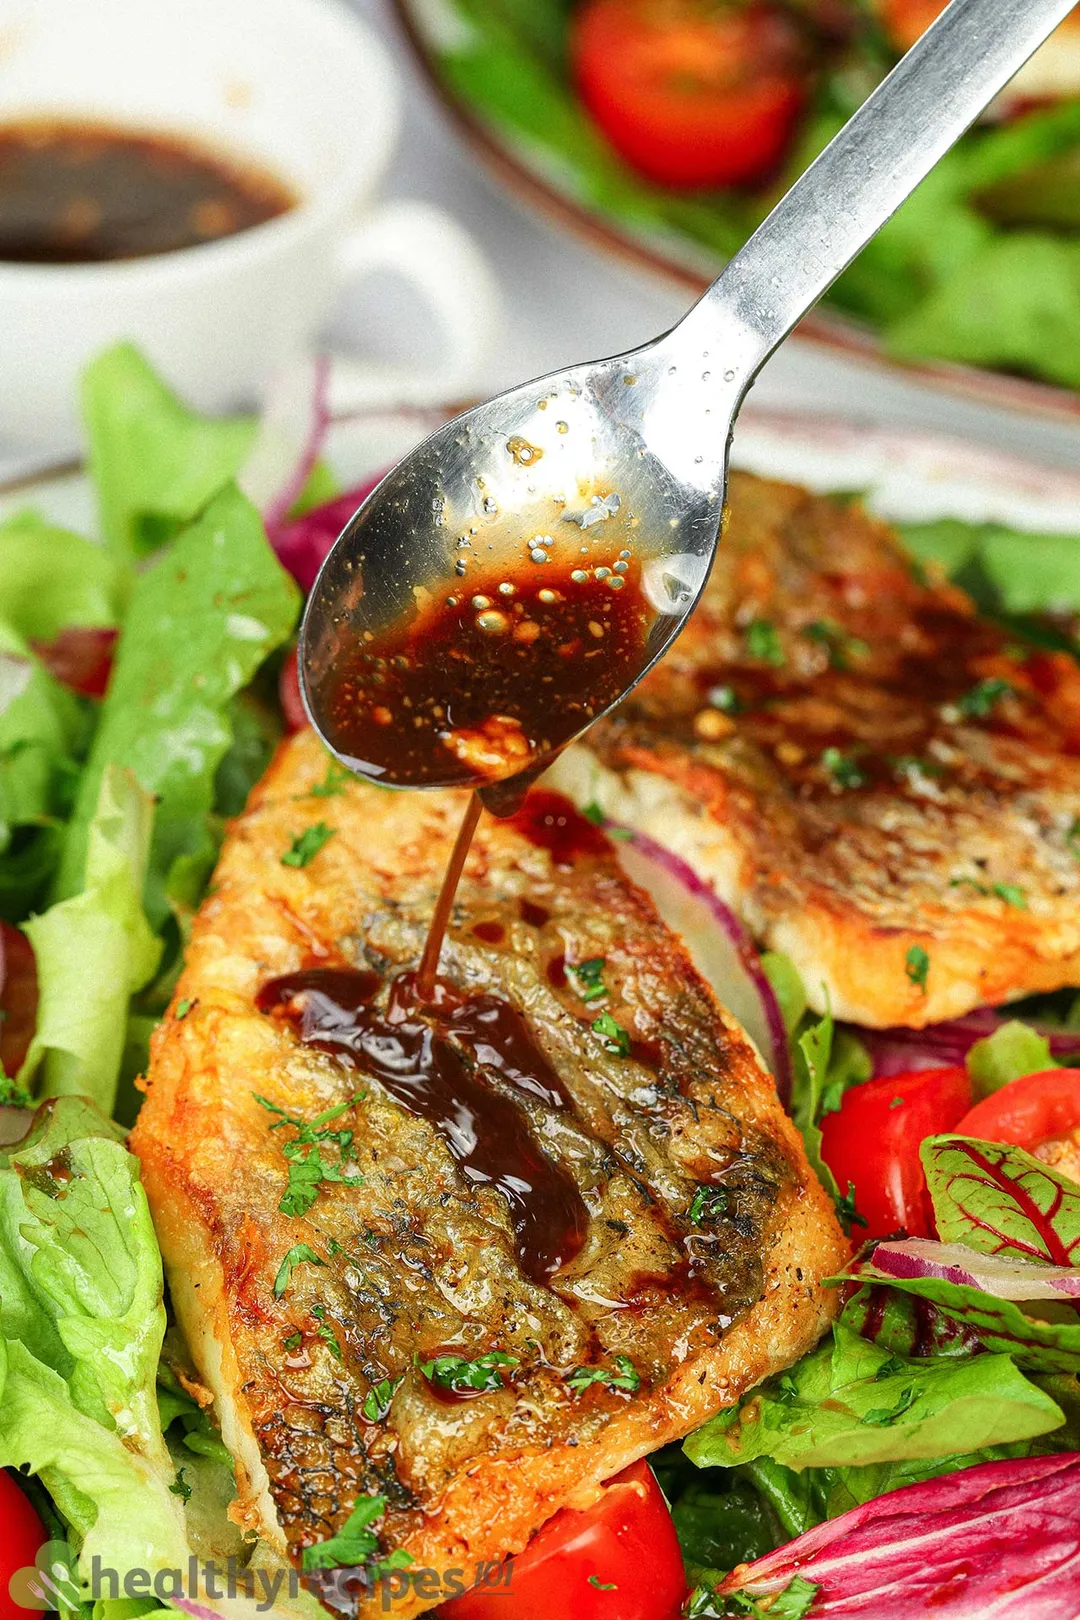 A spoon distributing balsamic vinegar onto pan-fried seabass fillets laid on a bed of lettuce.